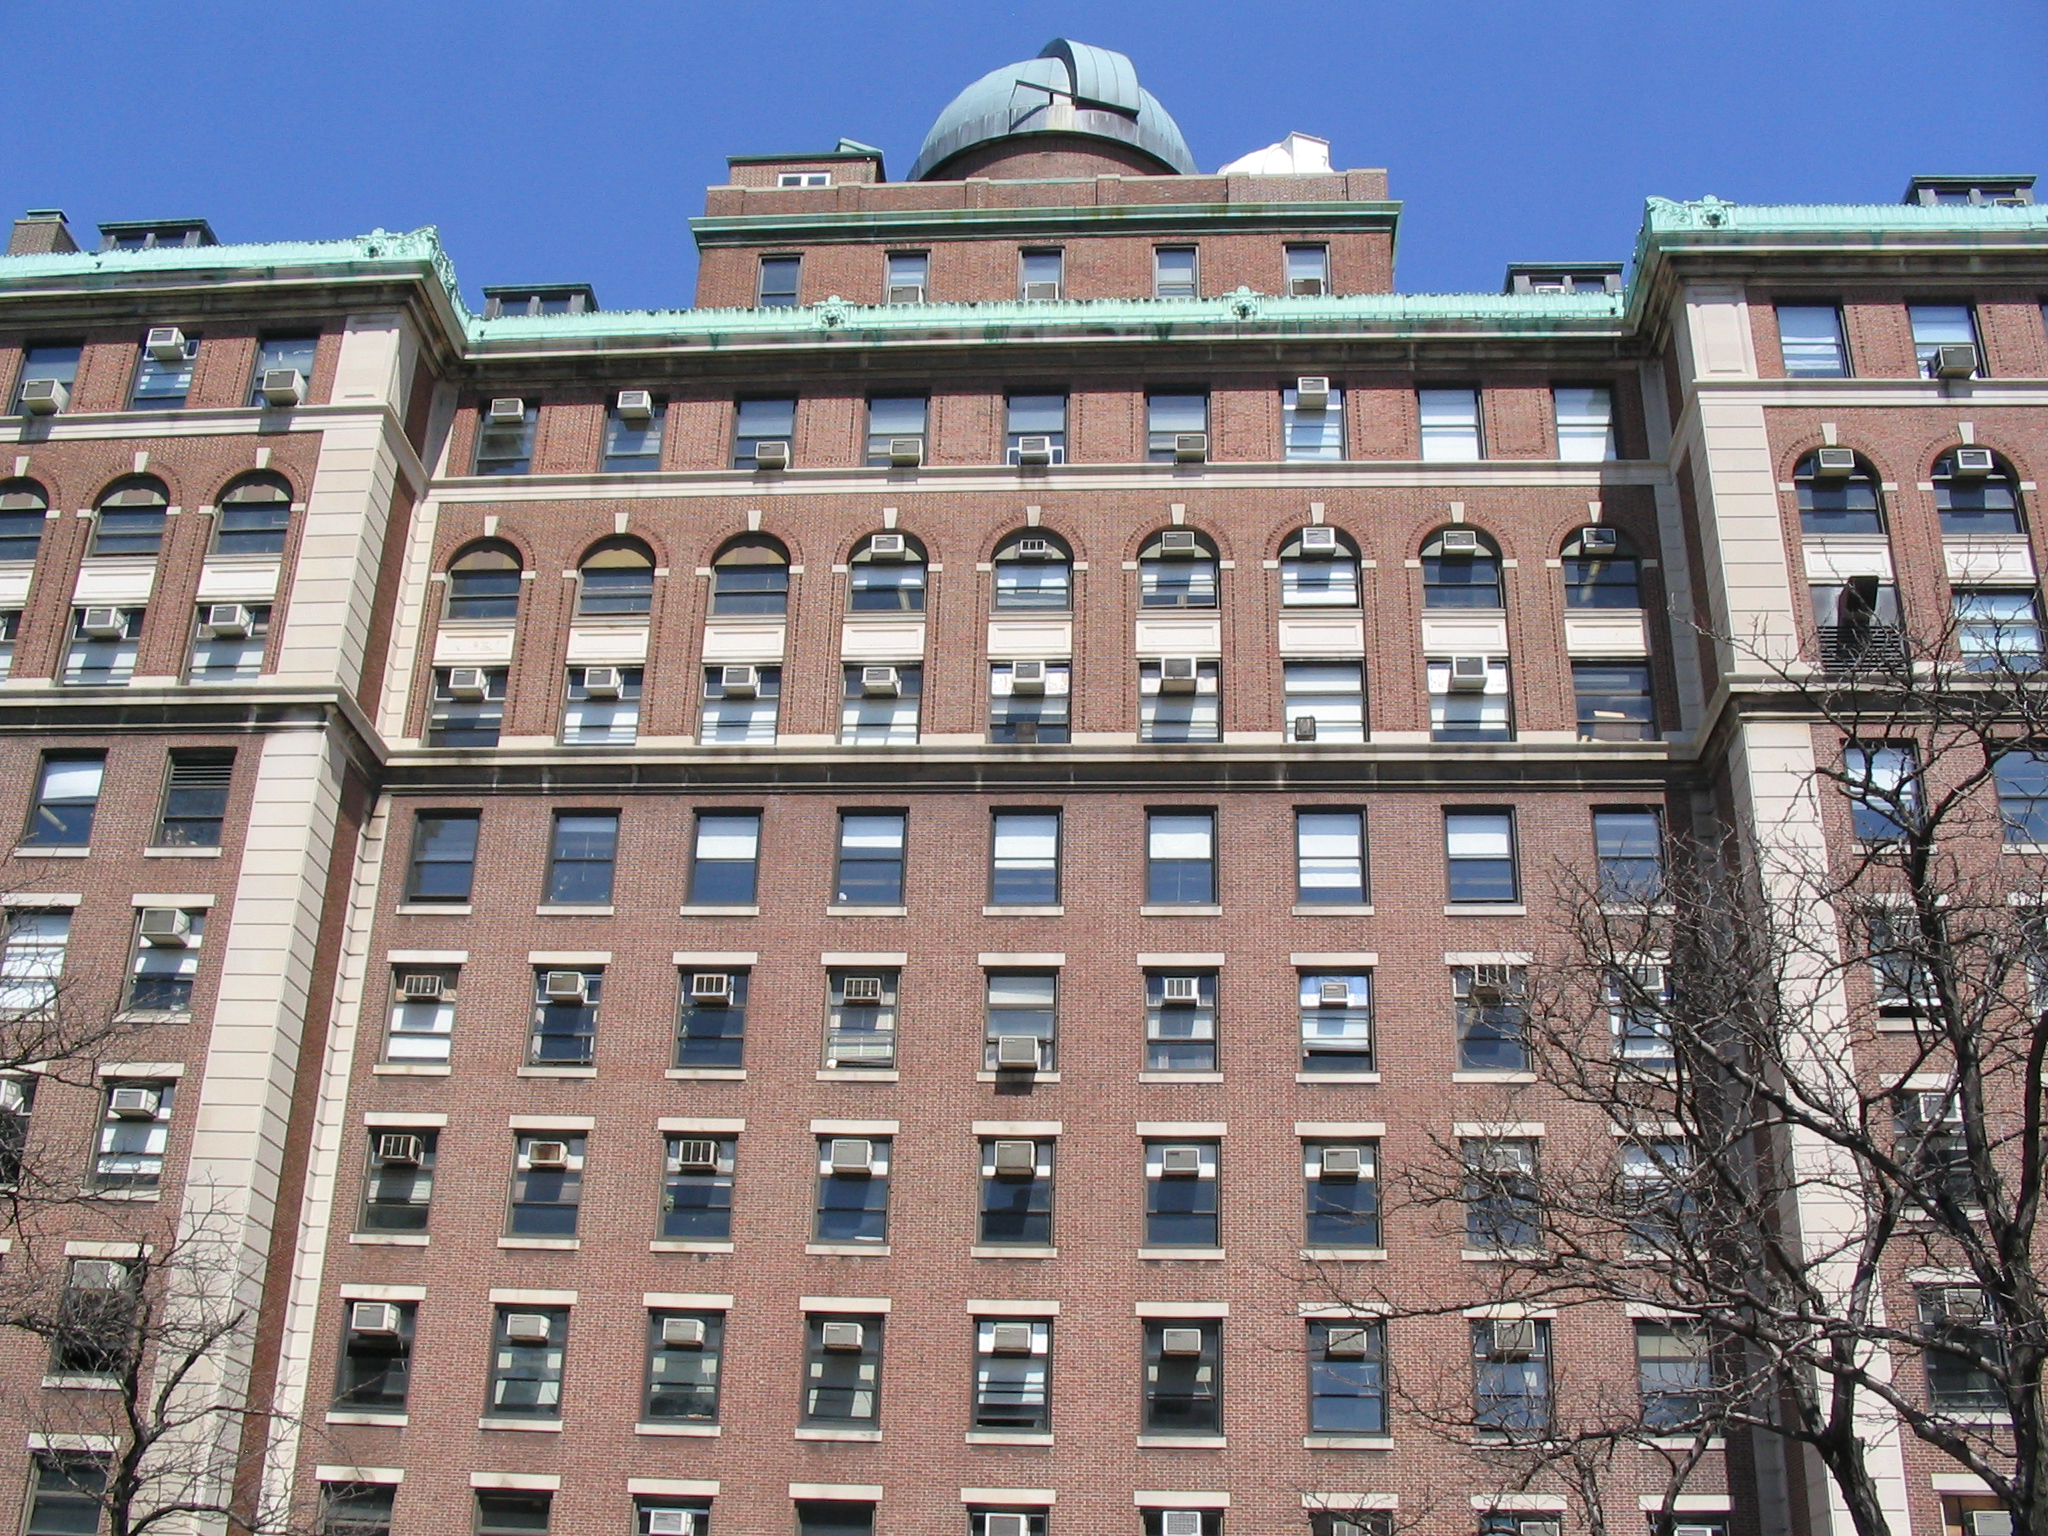 Pupin Hall, the physics building at Columbia. | CC via Wikimedia Commons